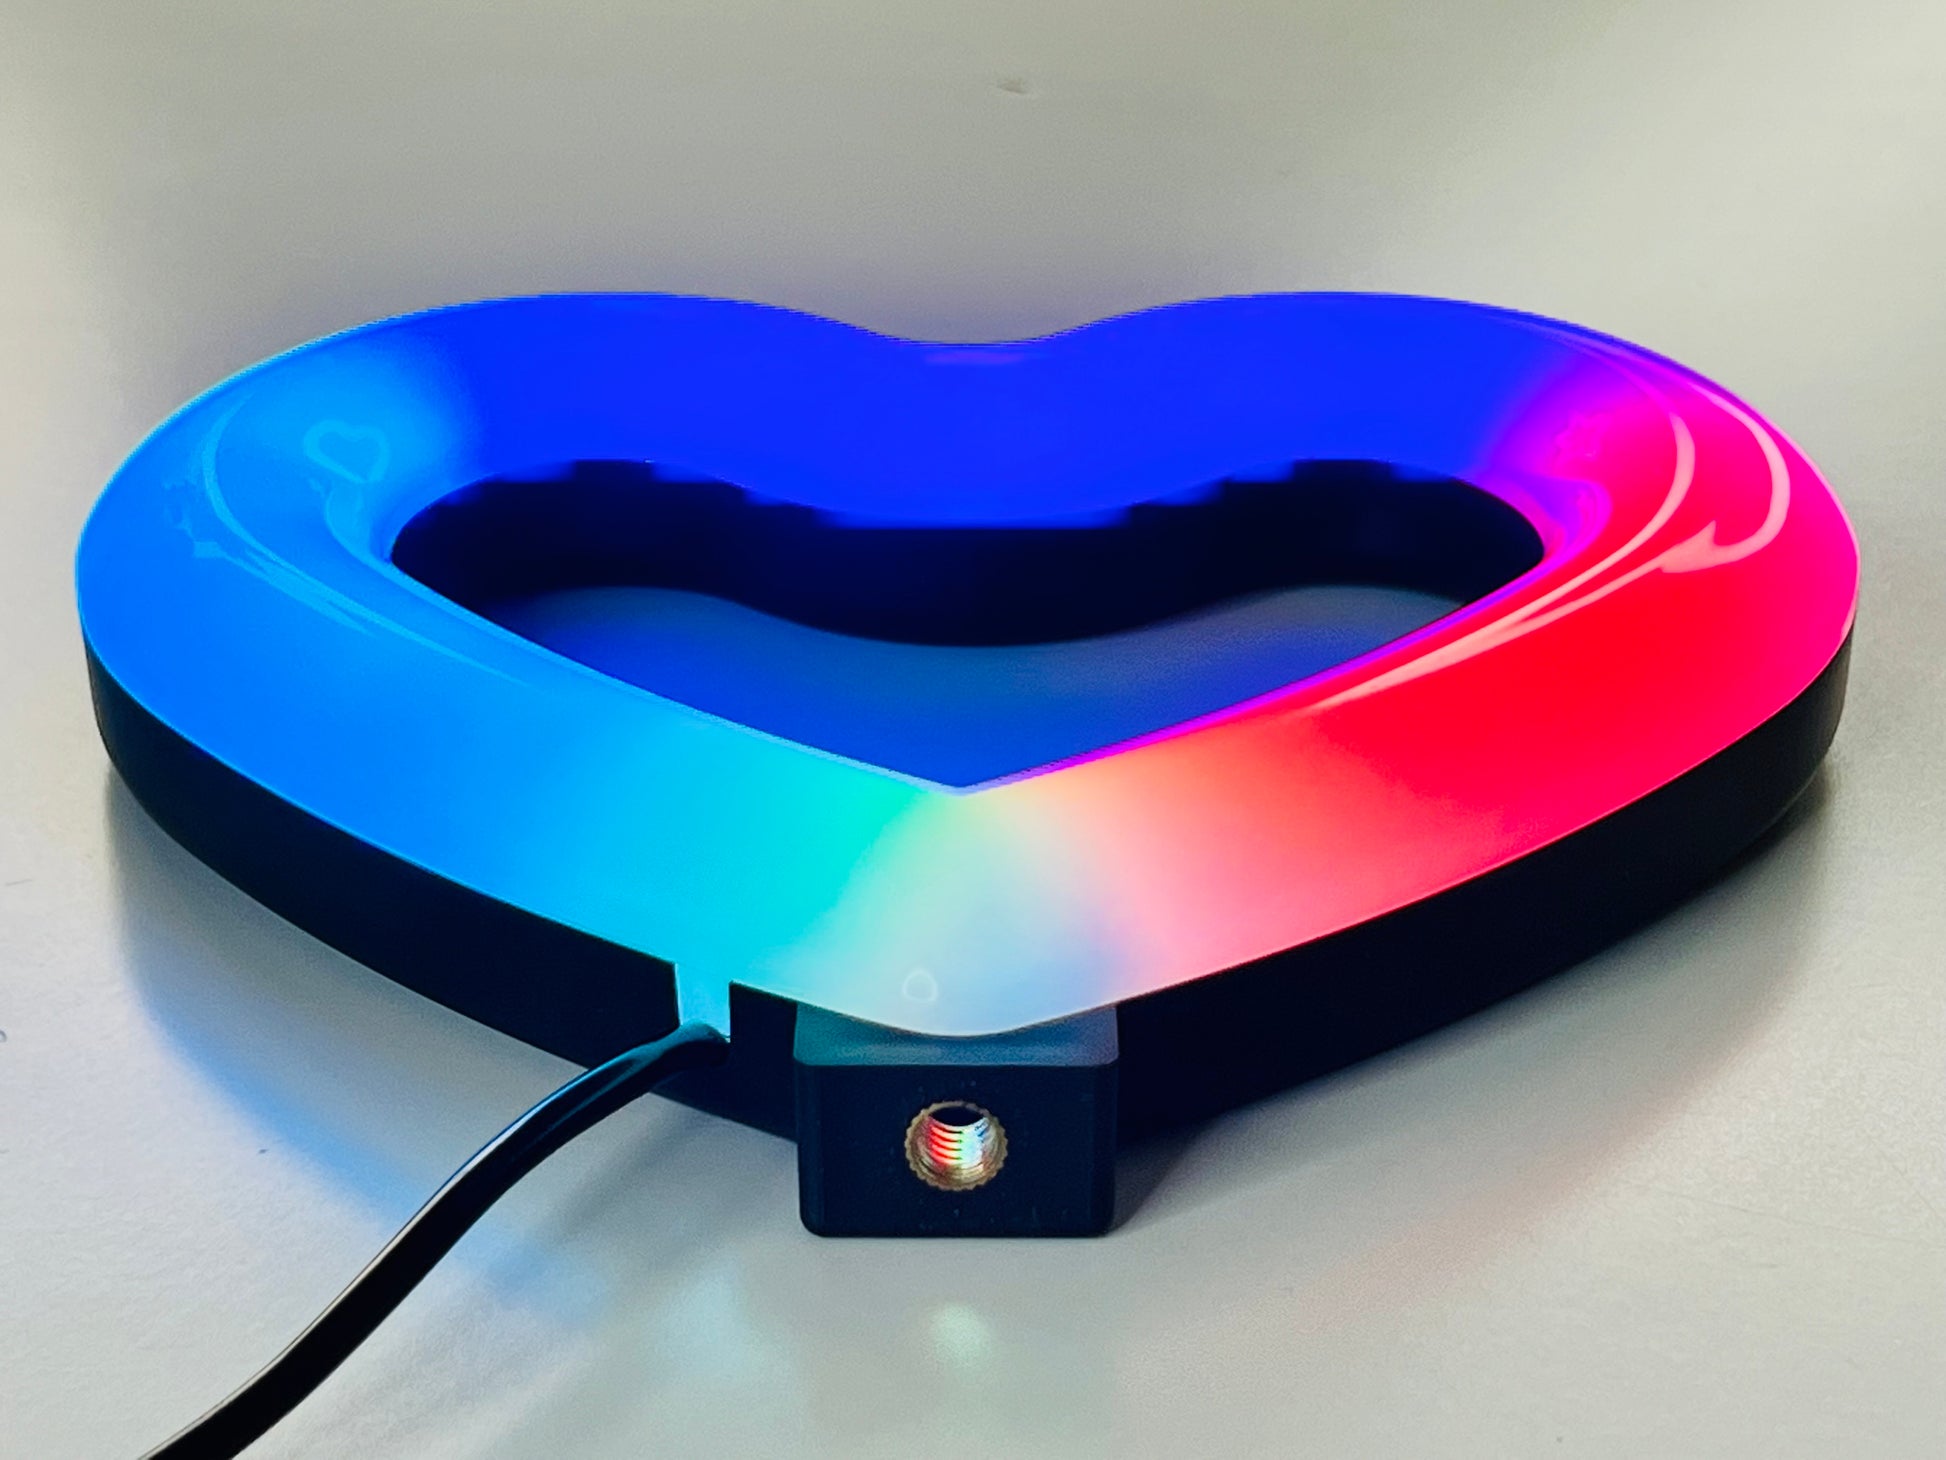 Kawaii Lighting Creator Kit - 6" Heart Shaped Ring Light Bottom with 1/4 inch female connection